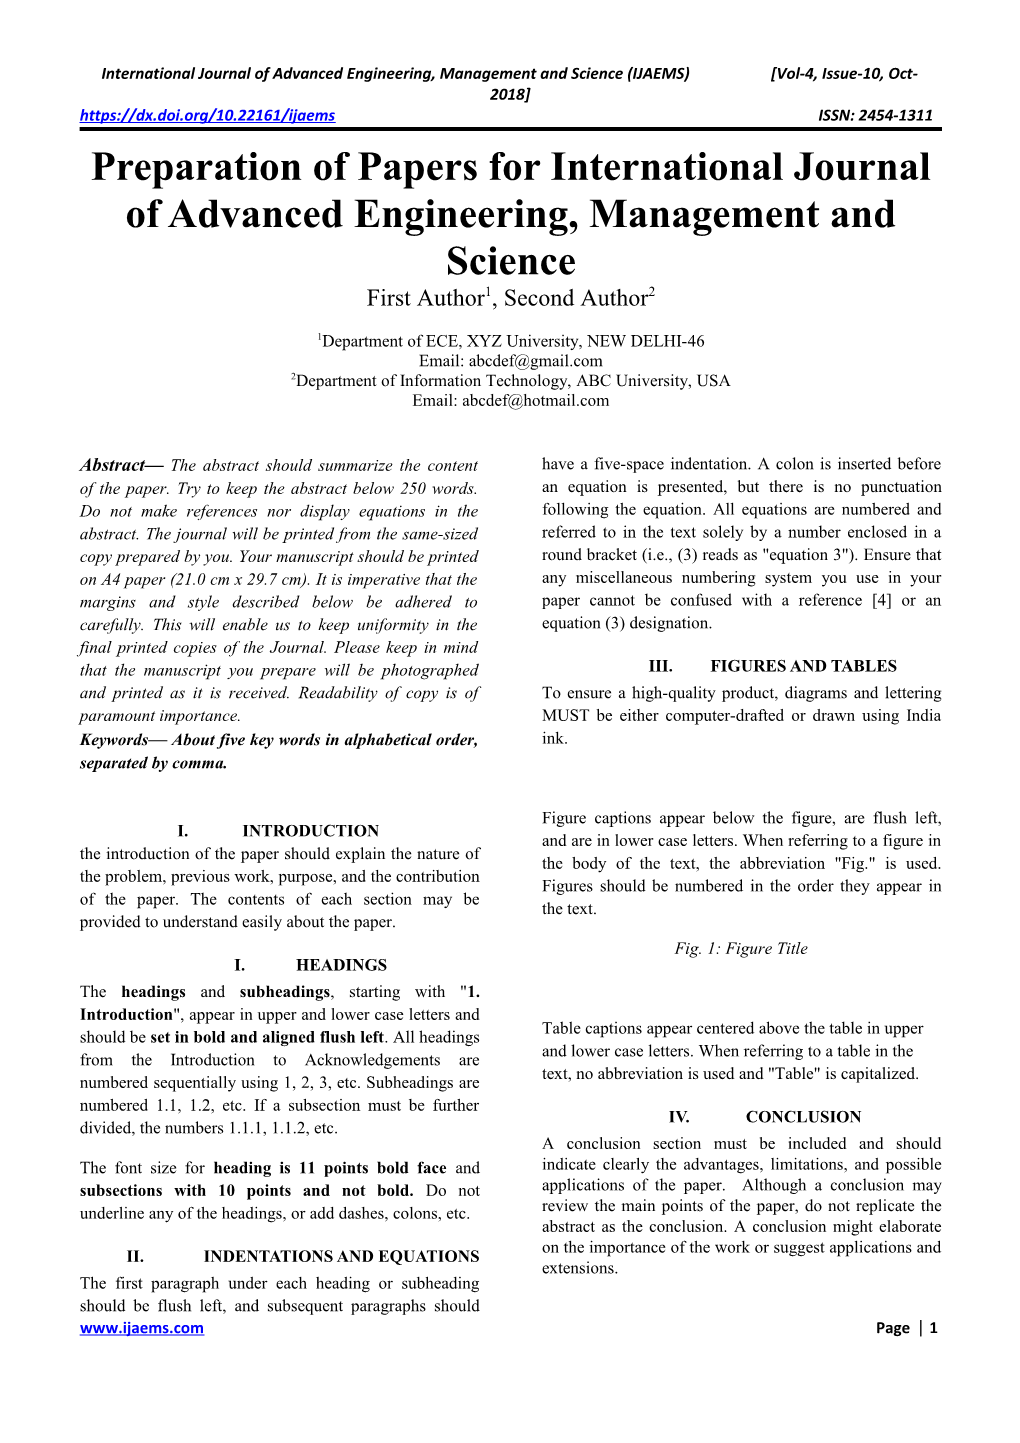 Preparation of Papers for International Journal of Advancedengineering, Management and Science